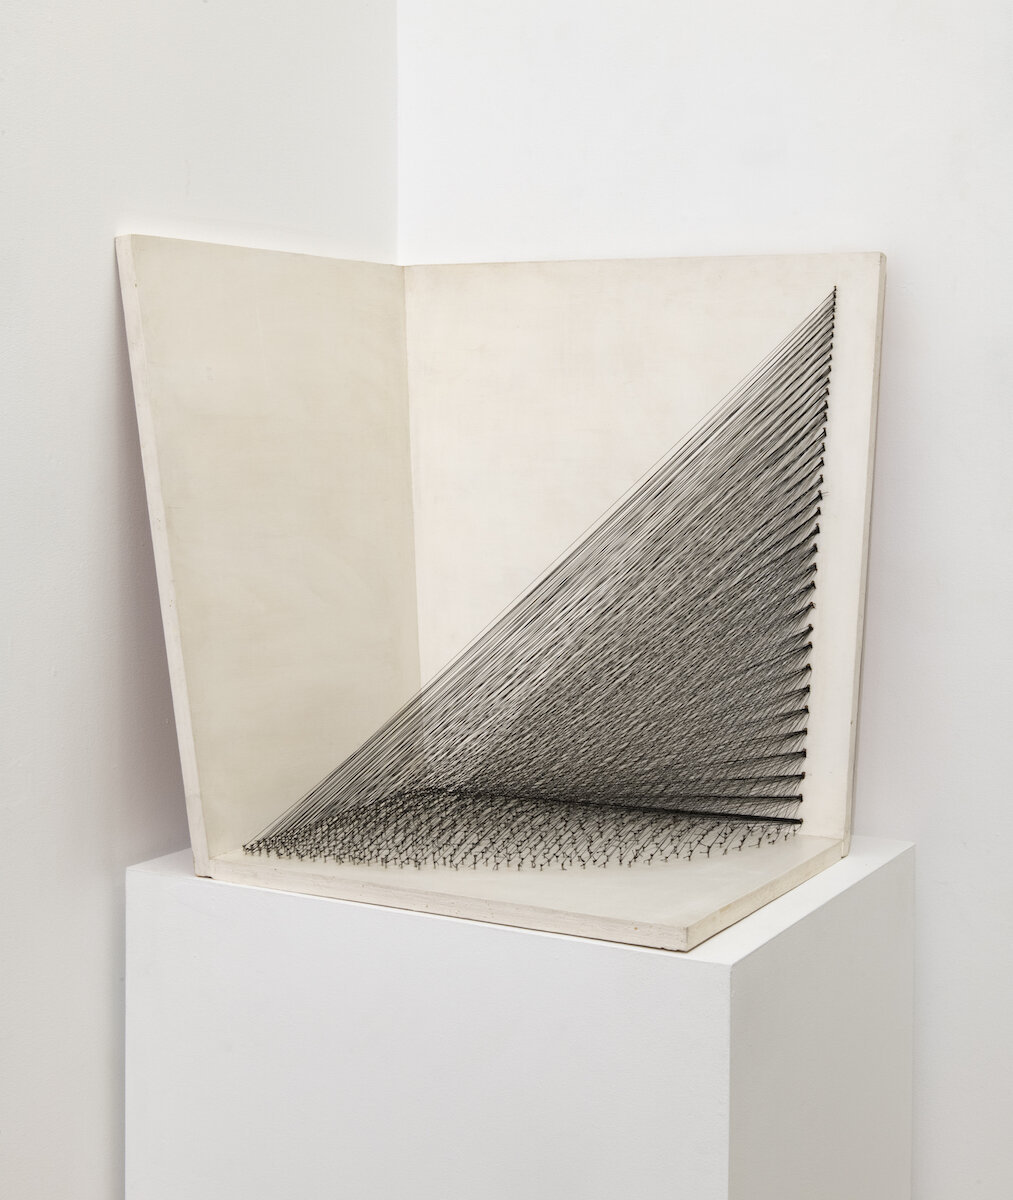   Model for Illusion of Trail Dinosaur , 1979, string and nails on painted wood, 23.875 x 23.875 x 20 in, Image courtesy of the Sol LeWitt Collection, Photo: Adam Reich 